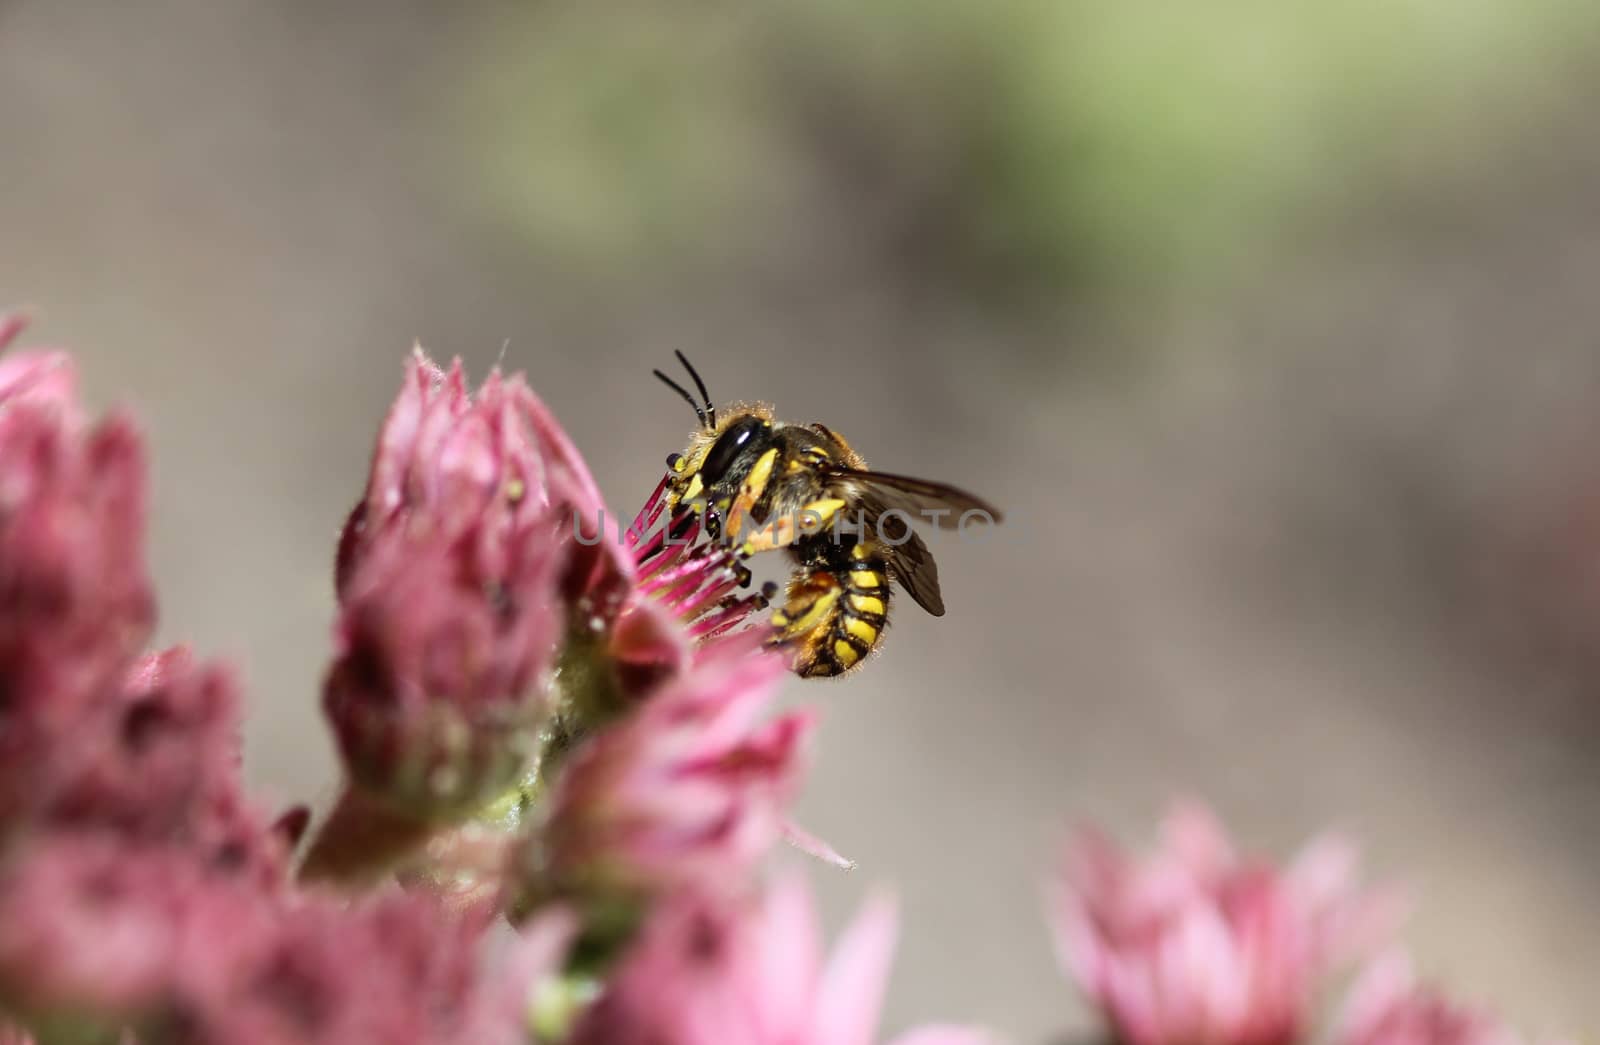 close up of the Anthidium manicatum, commonly called the European wool carder bee